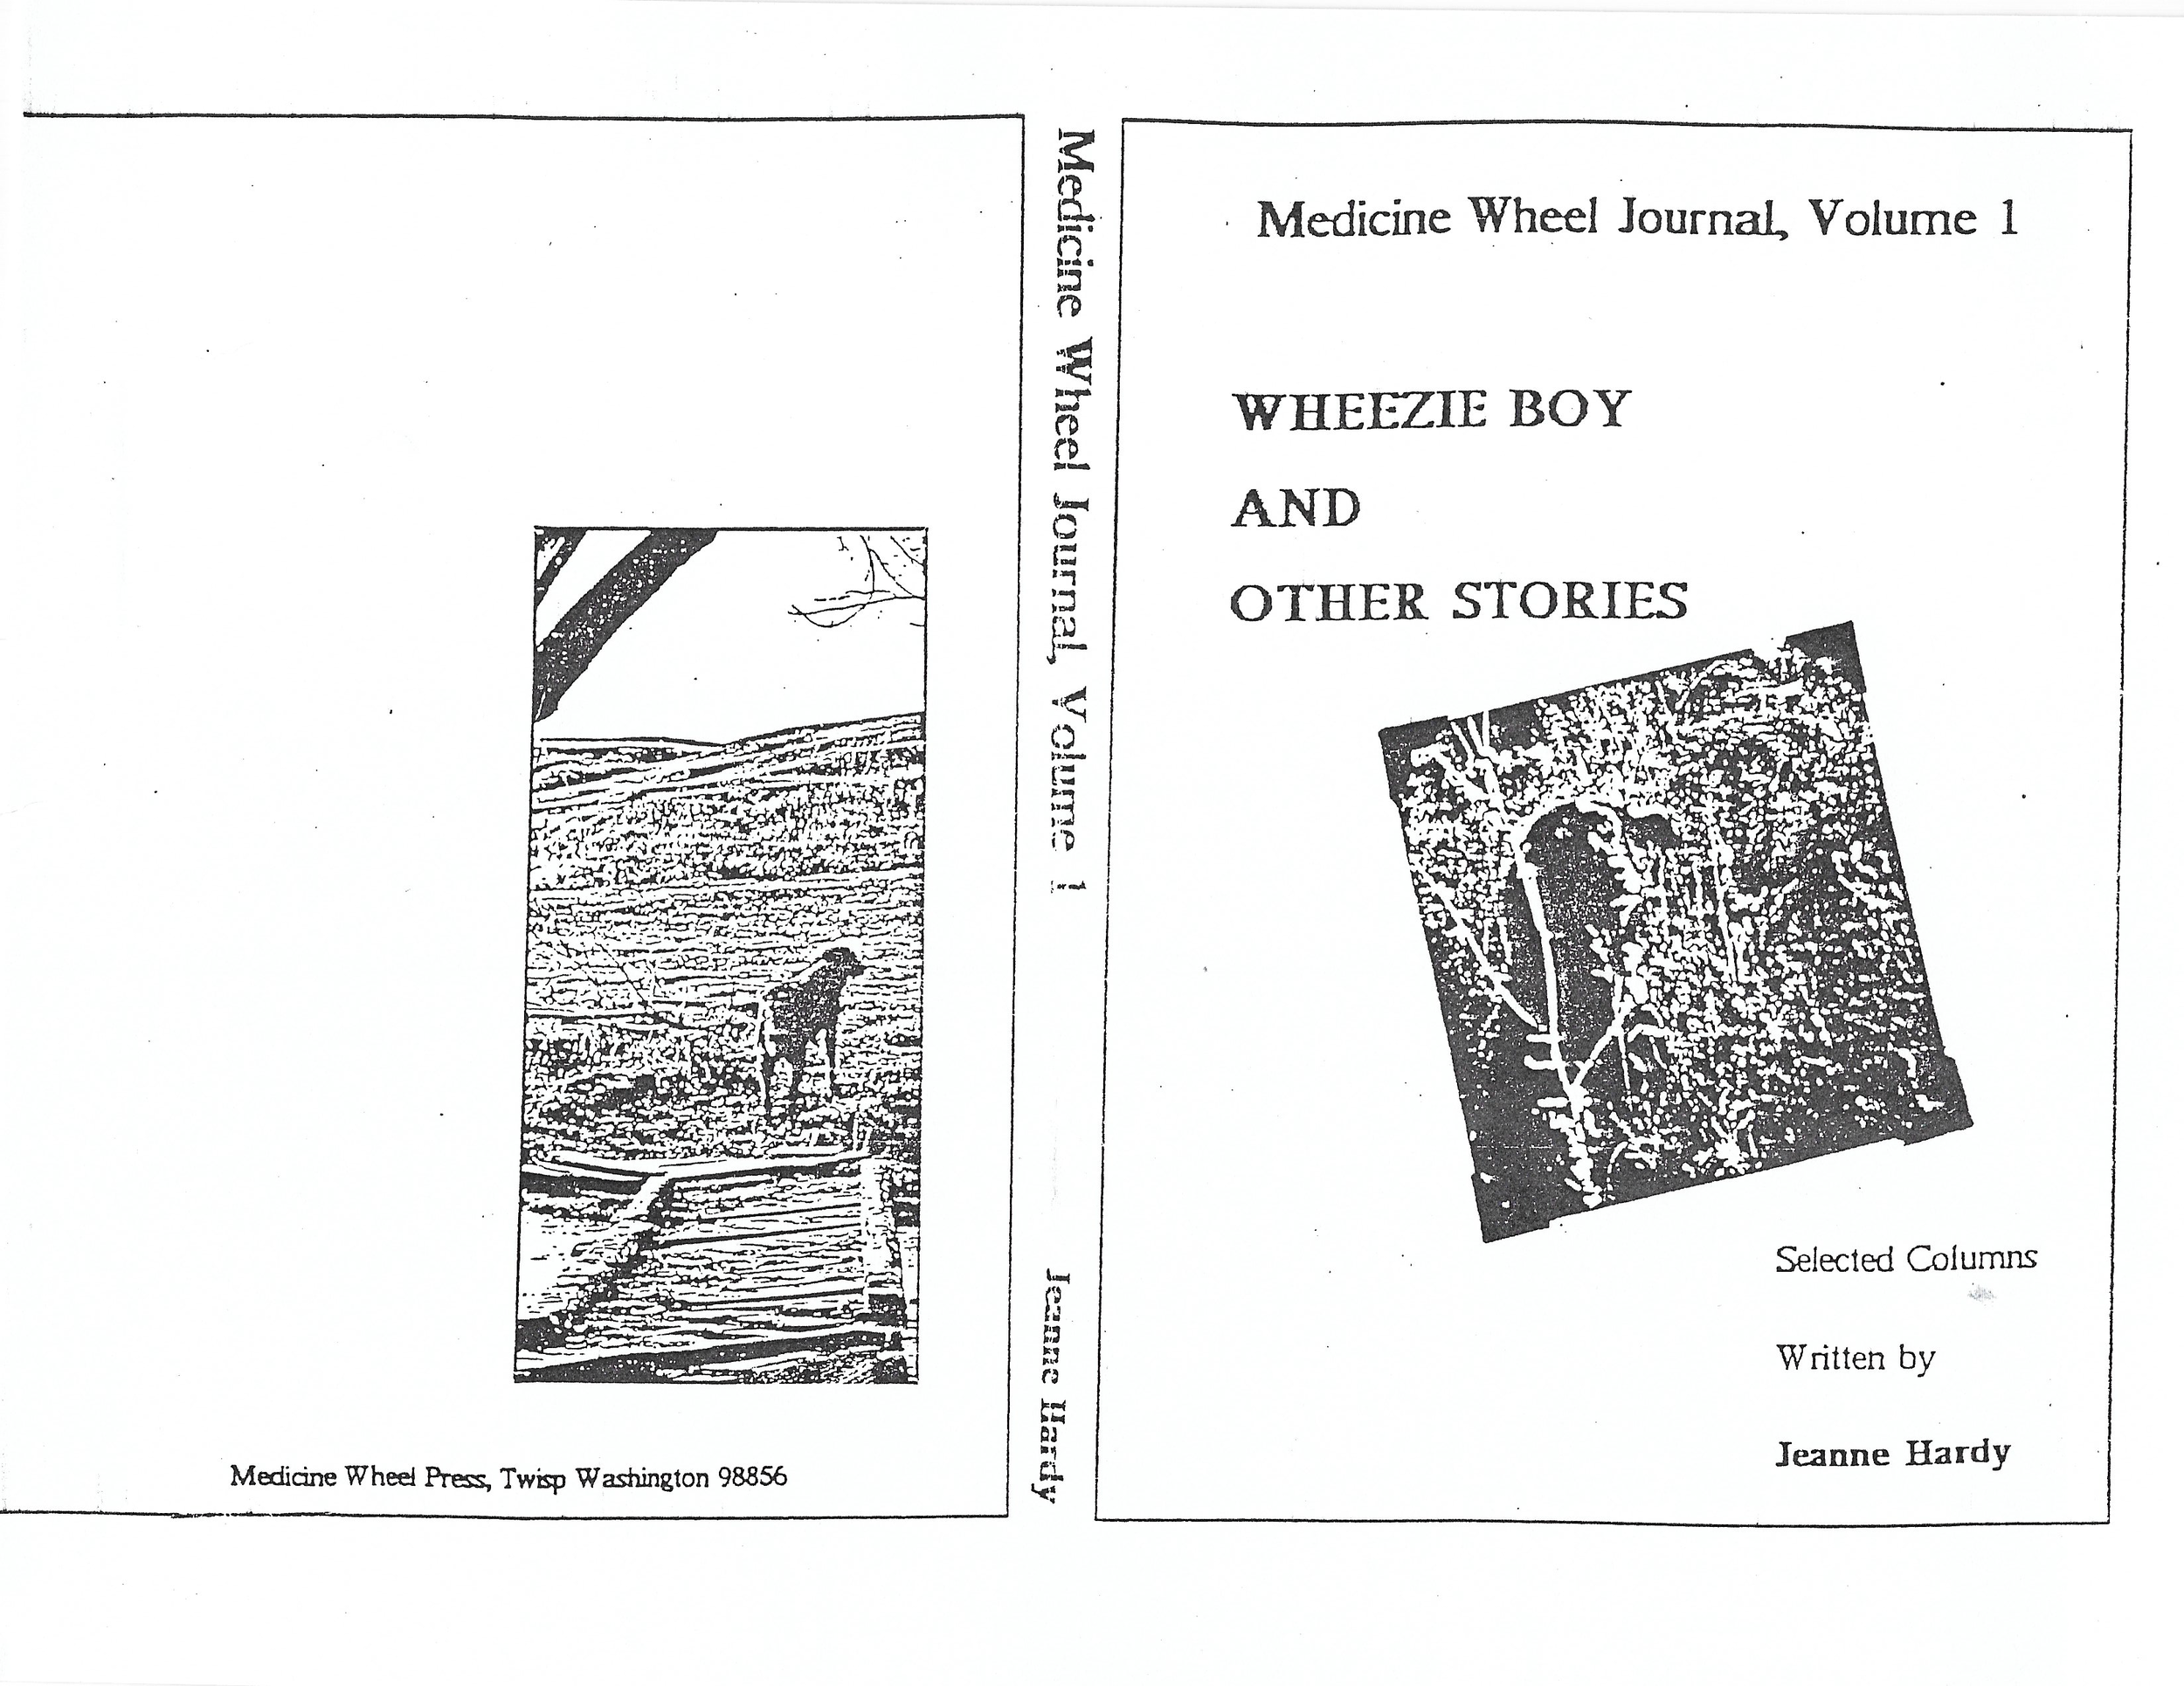 Wheezie Boy and Other Stories_Page_01.png